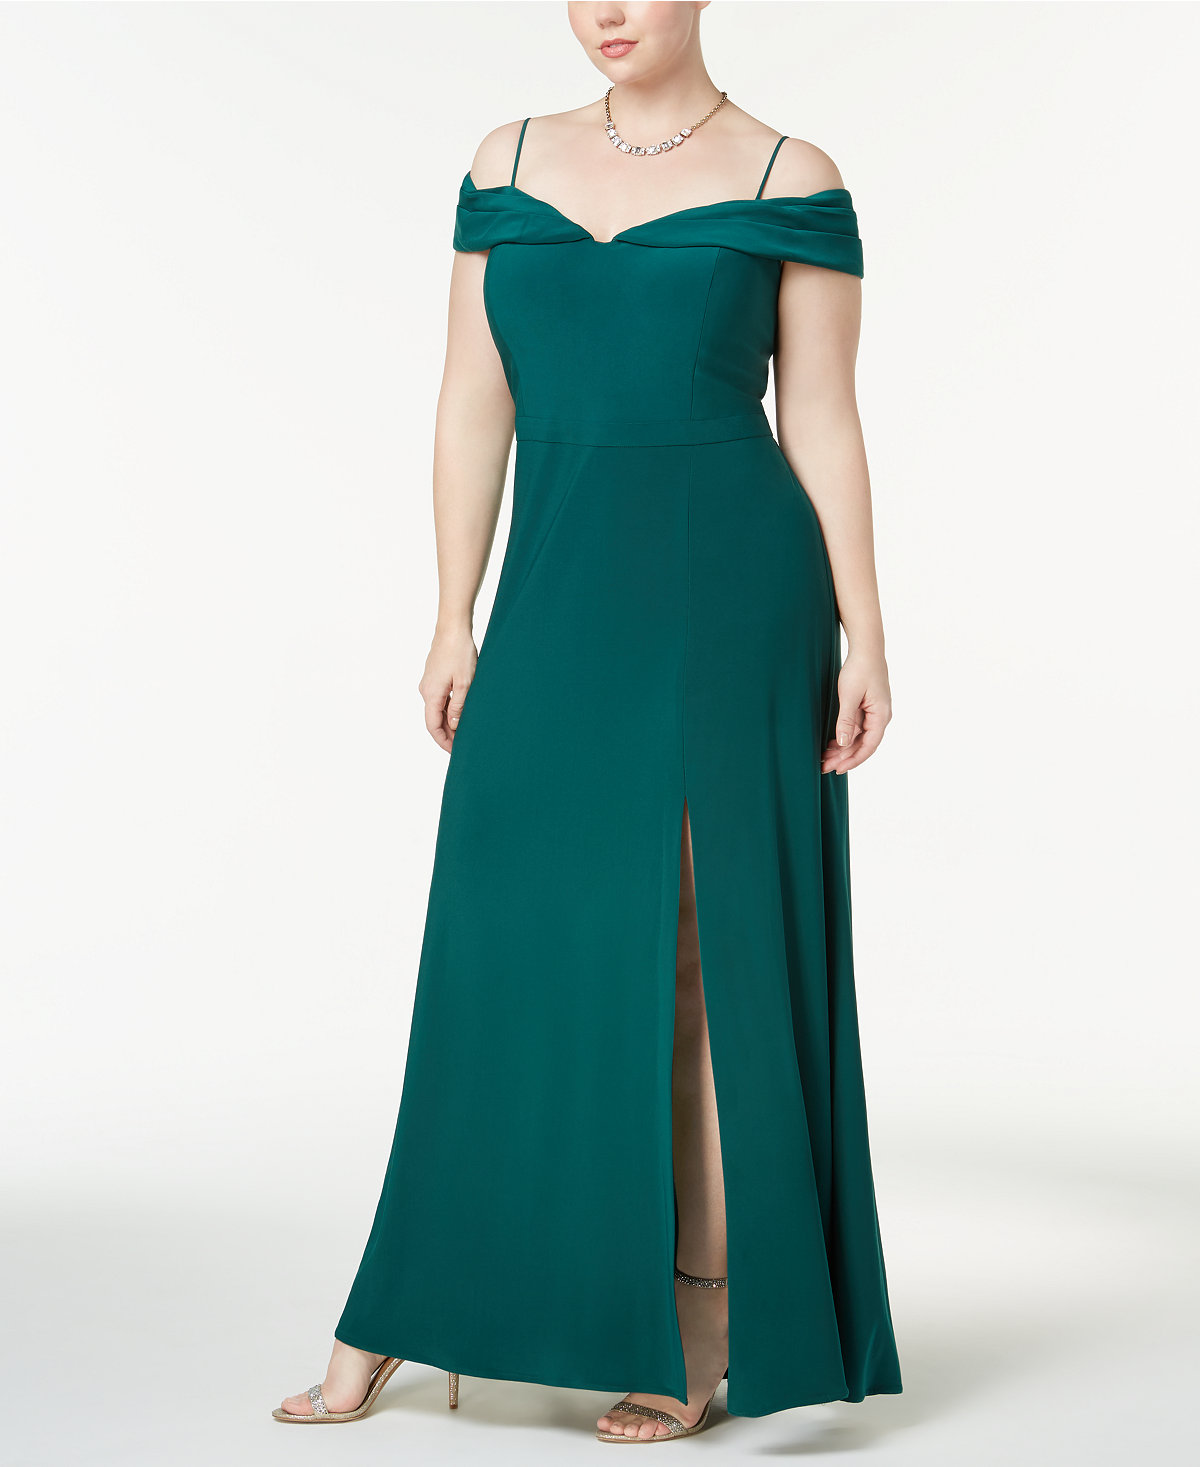 https://www.macys.com/shop/product/morgan-company-trendy-plus-size-off-the-shoulder-gown?ID=5440031&CategoryID=37038#fn=sp%3D1%26spc%3D1100%26ruleId%3D87%7CBOOST%20SAVED%20SET%7CBOOST%20ATTRIBUTE%26searchPass%3DmatchNone%26slotId%3D44